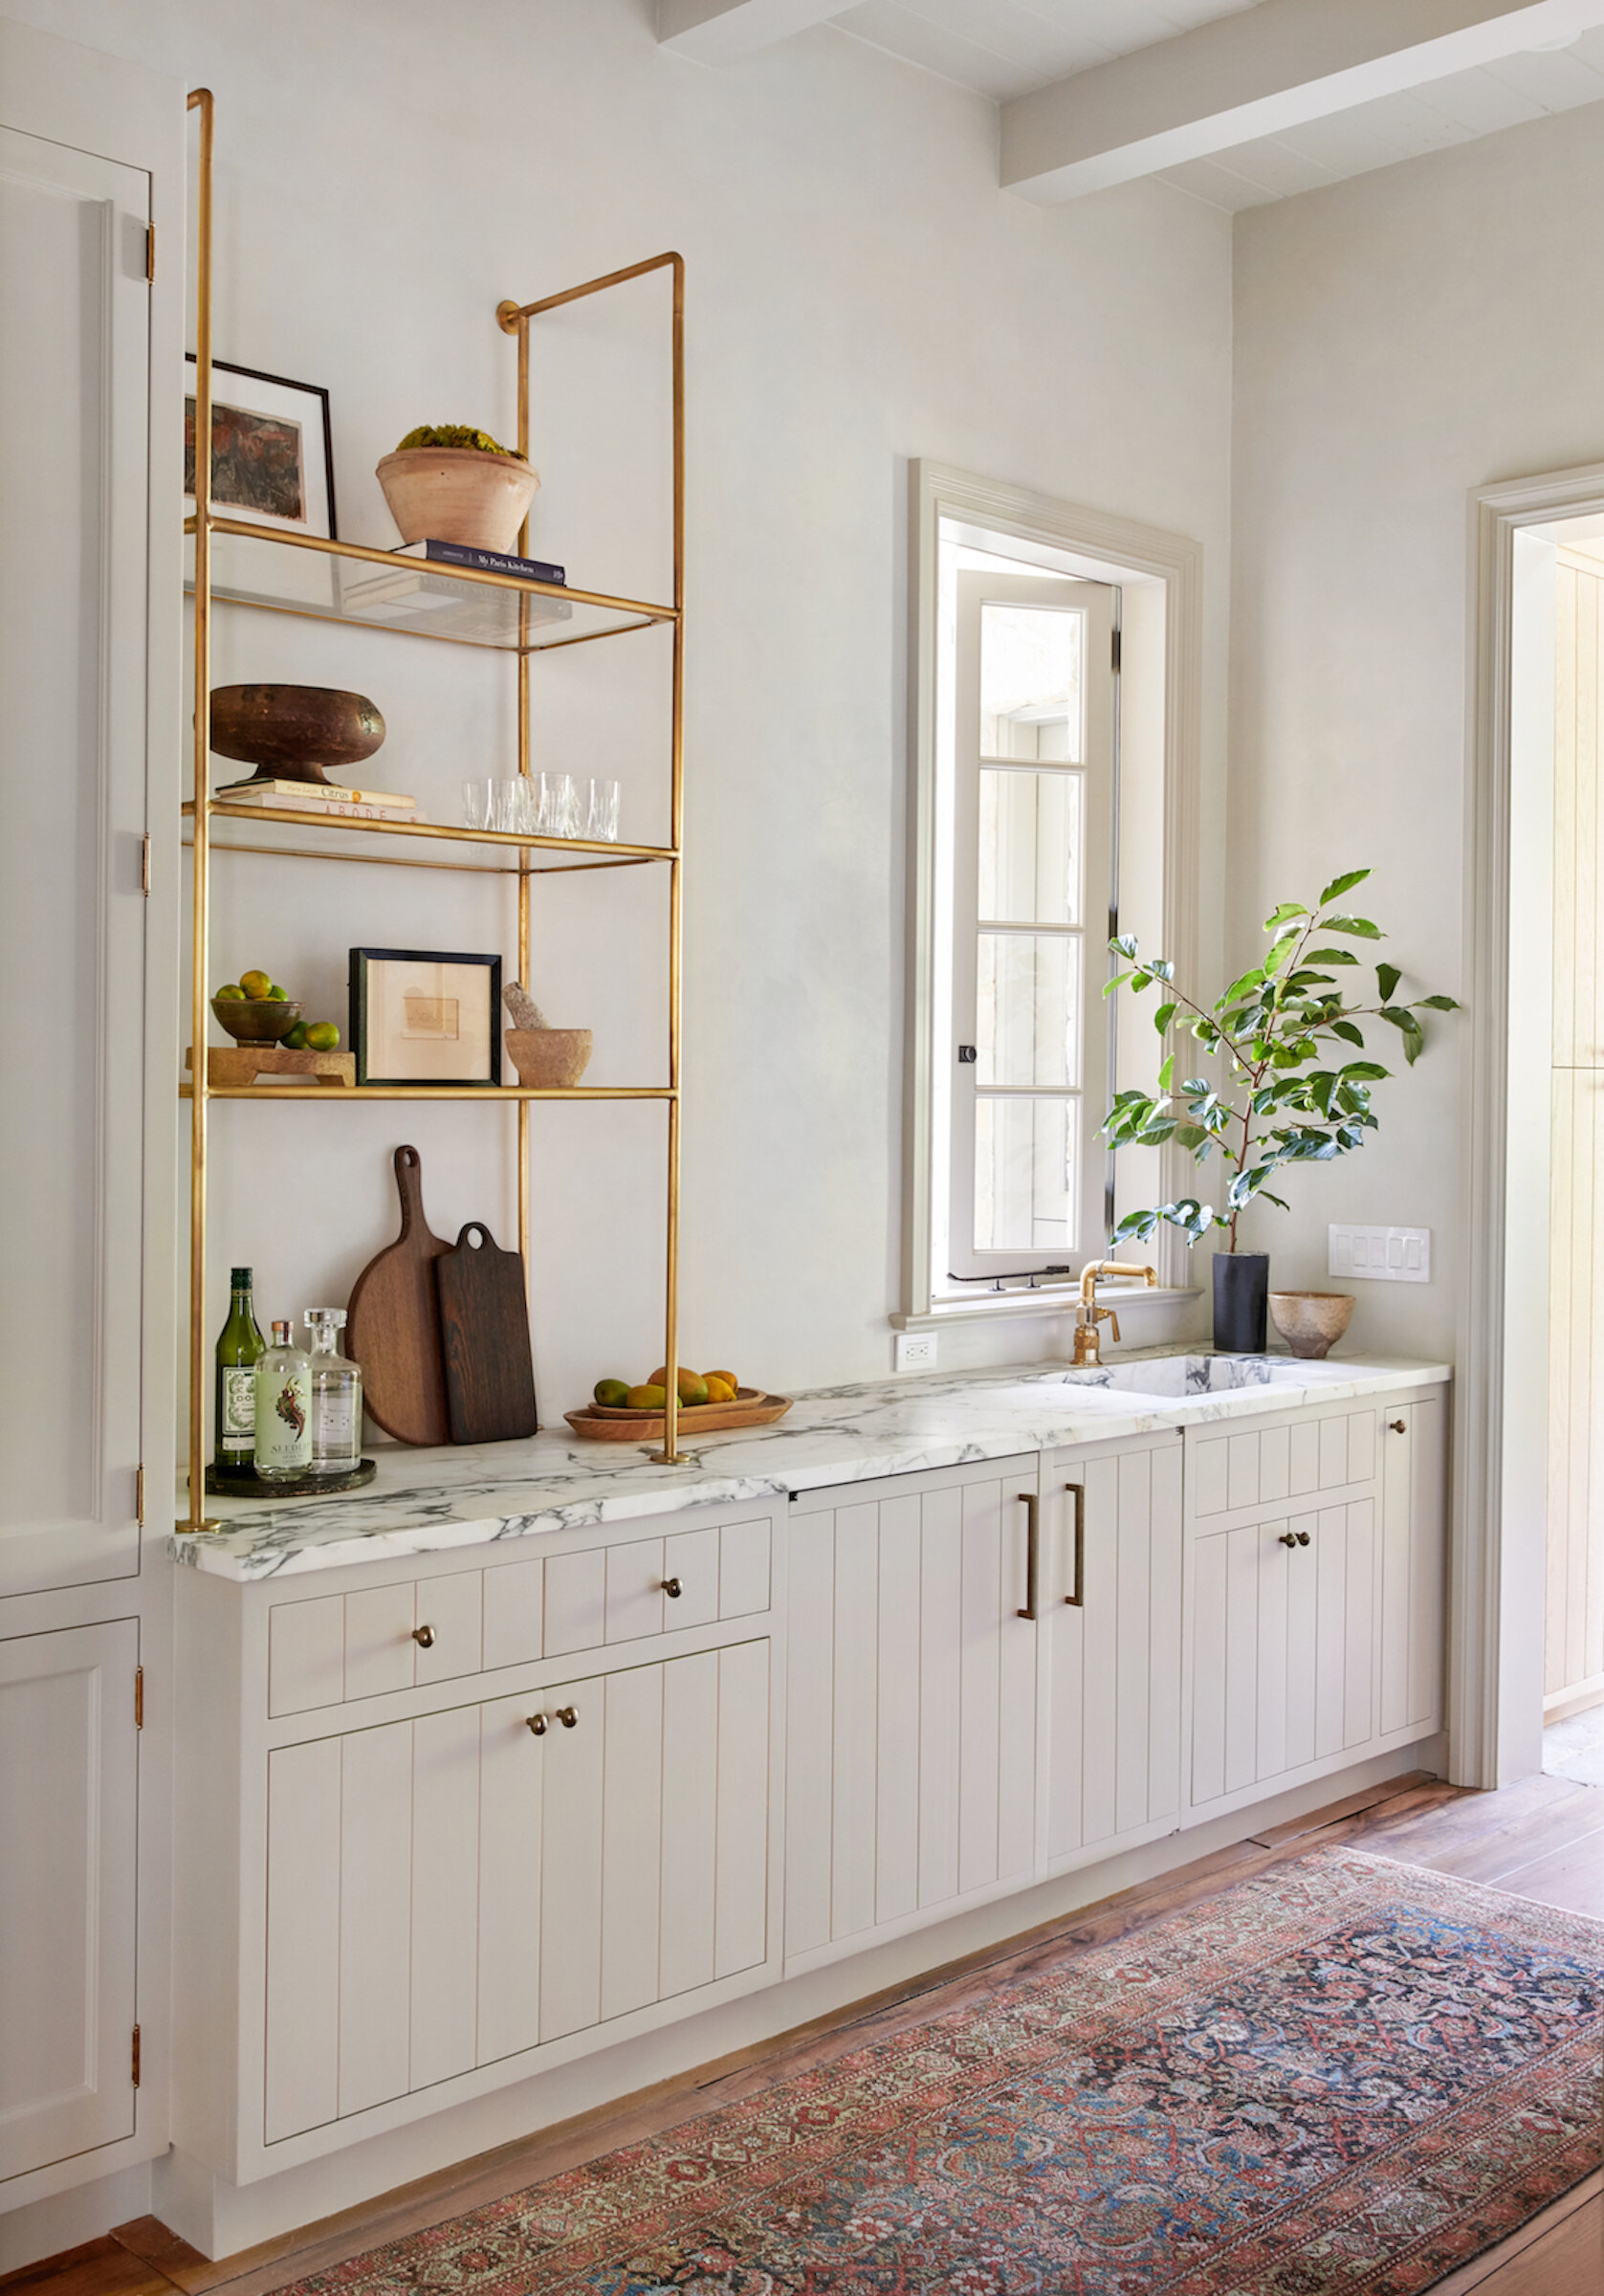 READER Q: HOW TO MIX METAL FINISHES IN A BATHROOM OR KITCHEN